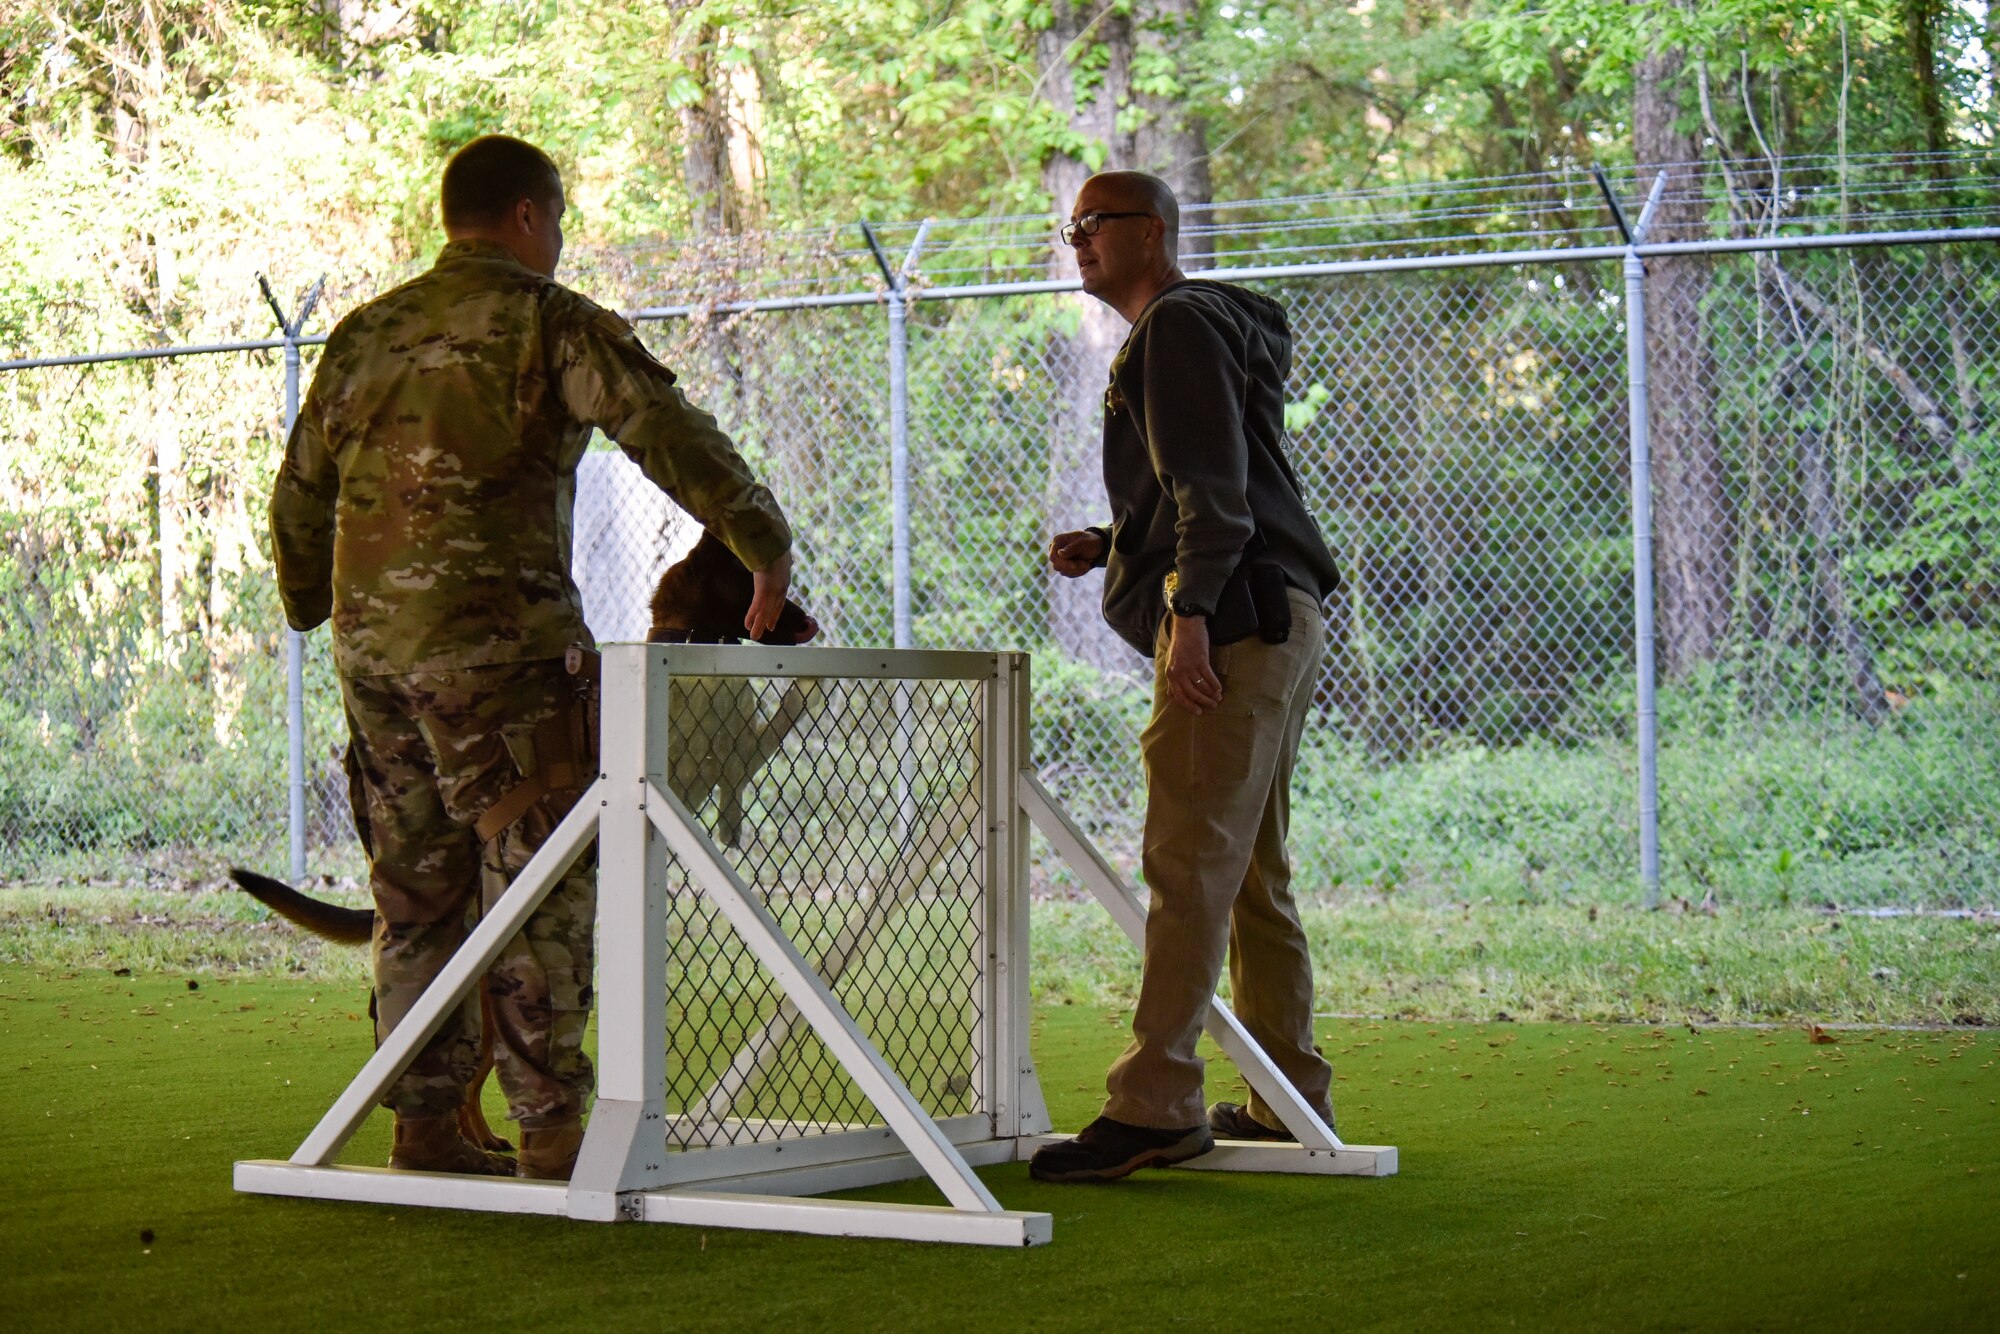 Tech. Sgt. Dakota Willis, left, 4th Security Forces Squadron military working dog section noncommissioned officer in charge, works with John Taylor, right, North Carolina State Bureau of Investigation special agent, to train Nick, NCSBI explosives detection canine, to jump a fence at Seymour Johnson Air Force Base, North Carolina, April 20, 2021. Dog handlers and their dogs from the NCSBI and other agencies joined up with Team Seymour MWD handlers in a joint training day. (U.S. Air Force photo by Staff Sgt. Kenneth Boyton)